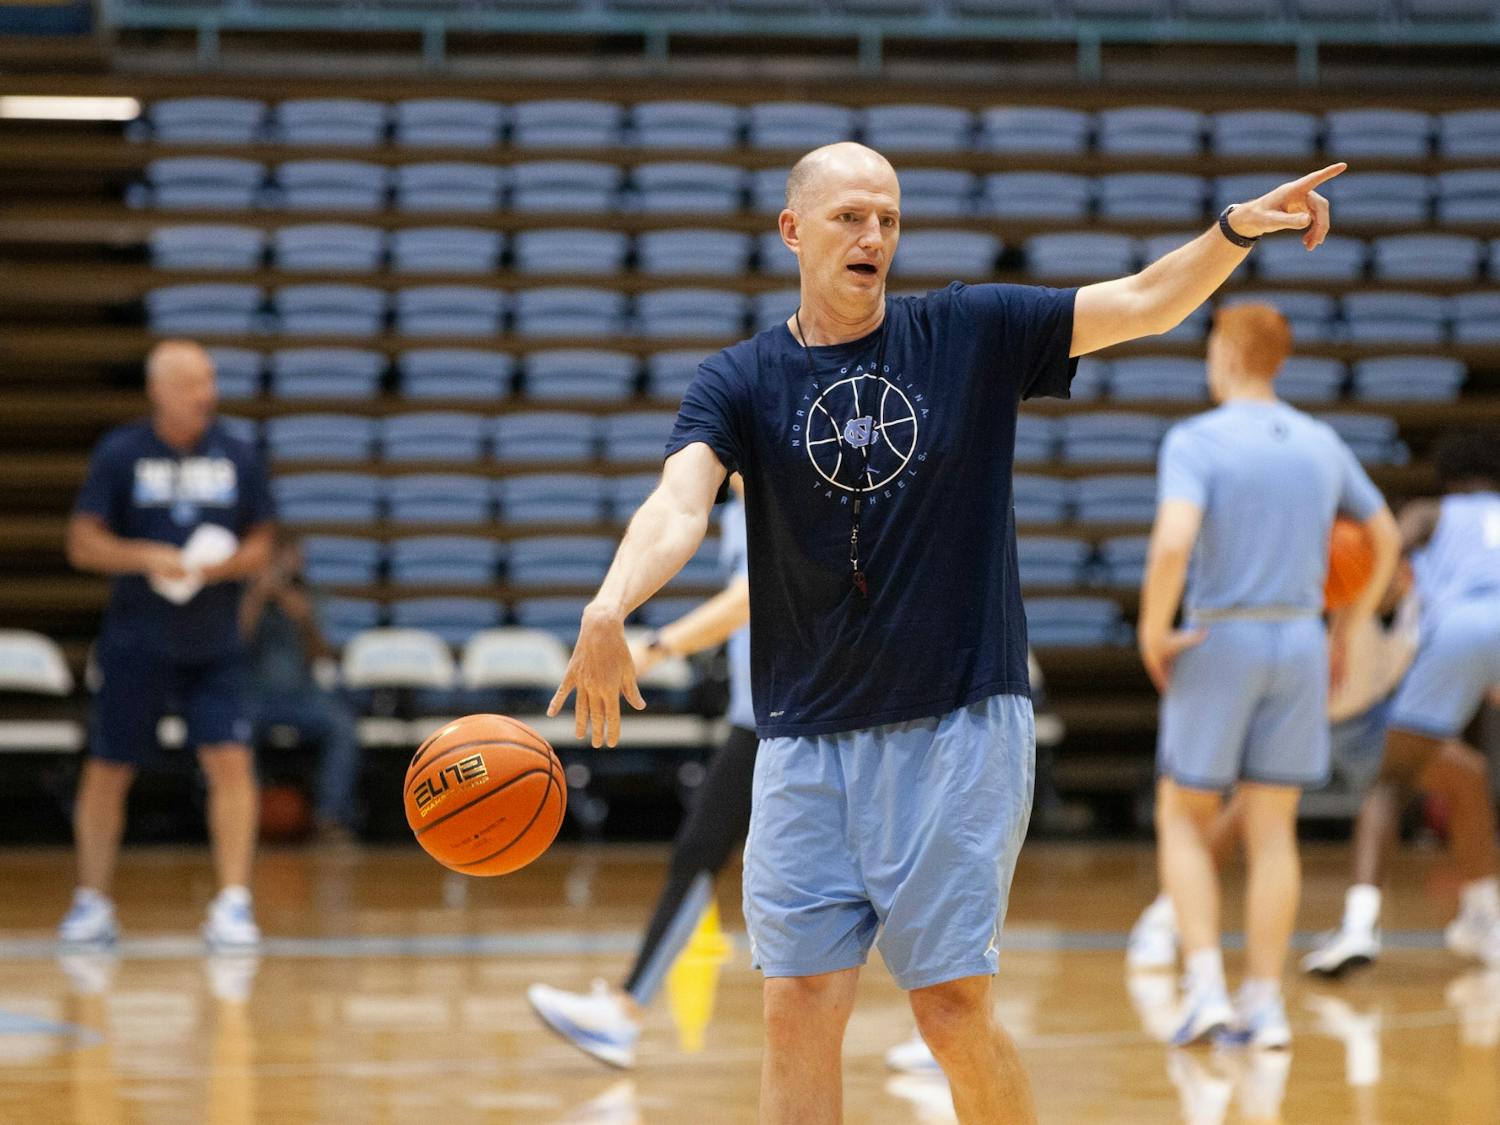 Assistant coach Brad Frederick leads a drill at the UNC men's basketball practice on Sept. 29 at the Dean Dome.